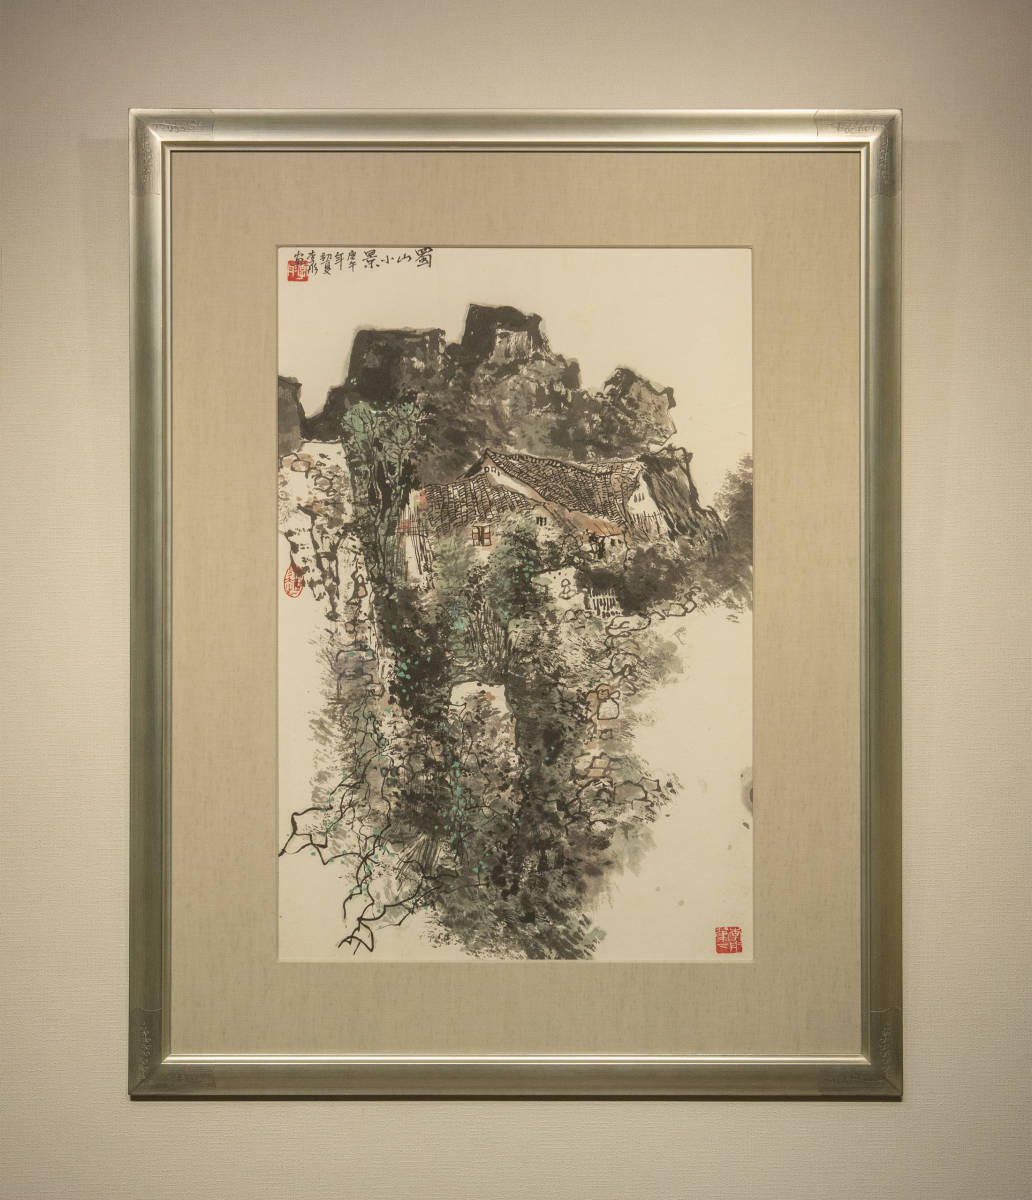 Li 彤 1990, Small Scenery of Shushan, Framed, Authentic, Chinese Painting, Artwork, Painting, others